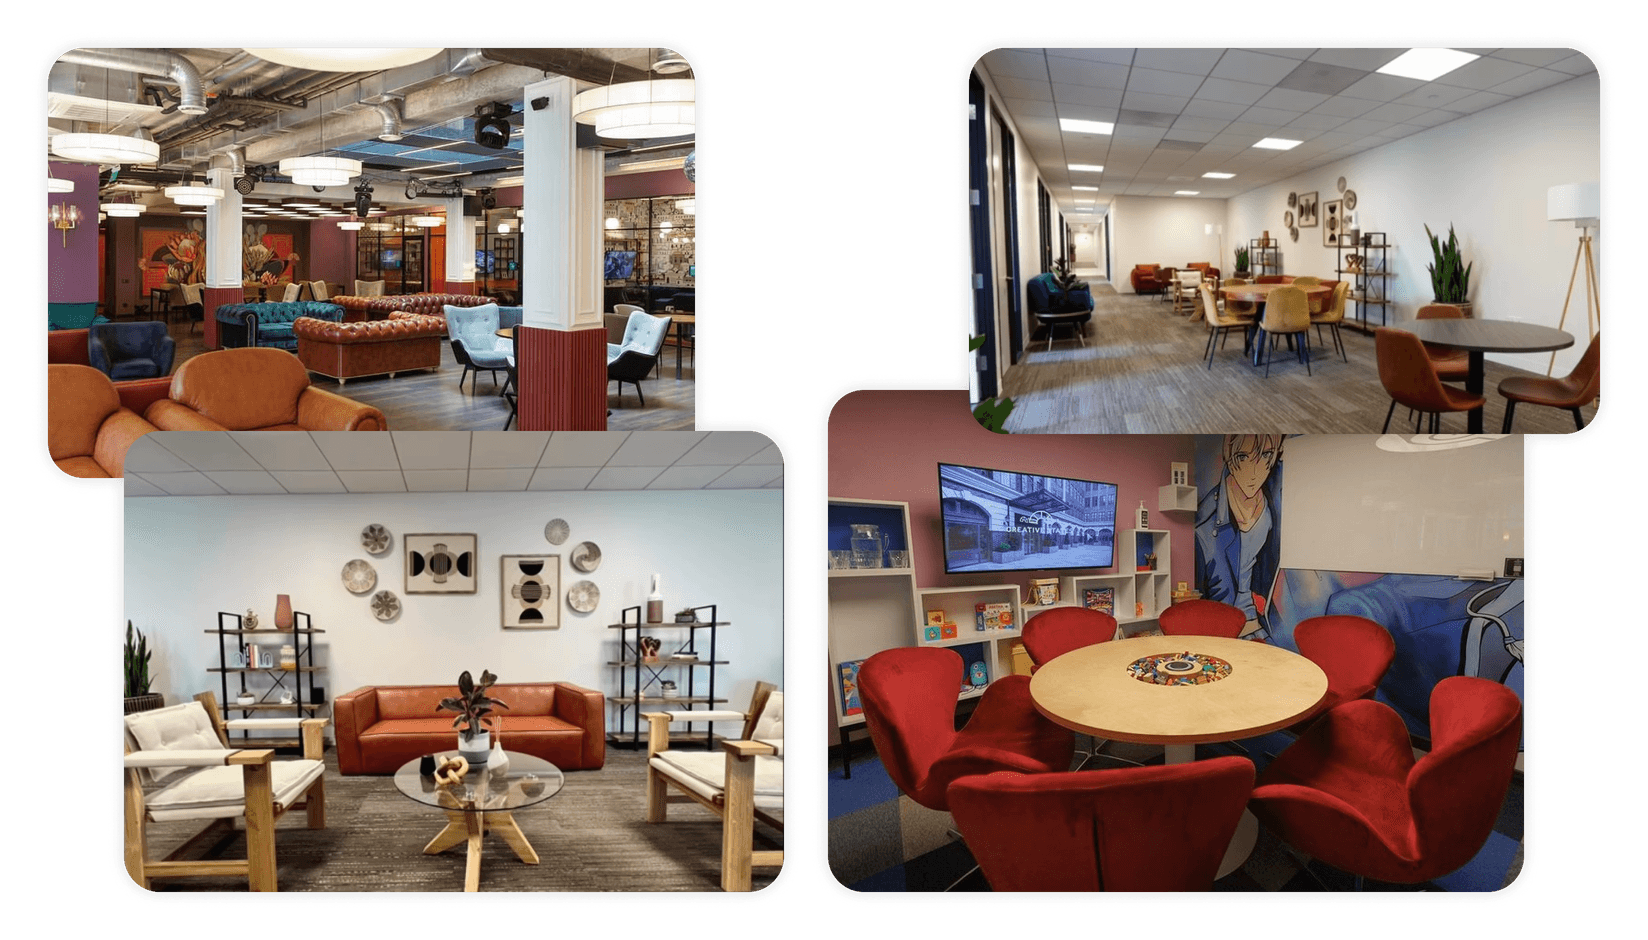 Coworking space design examples